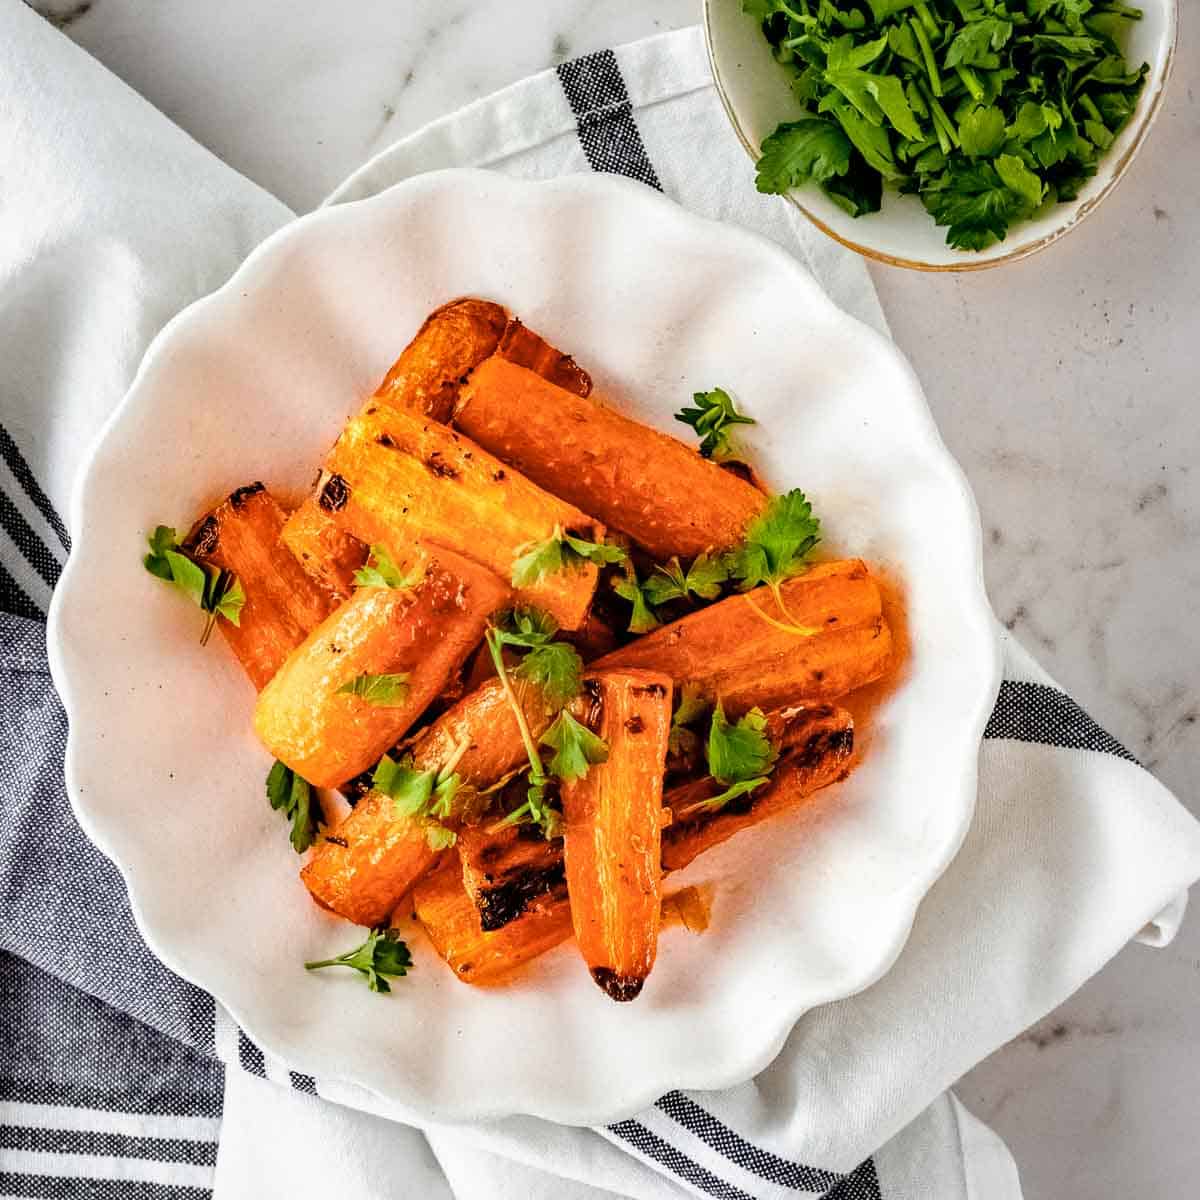 Overhead shot of roasted carrots garnished with herbs on a white plate on a grey and white cloth with a small bowl of herbs on the side.